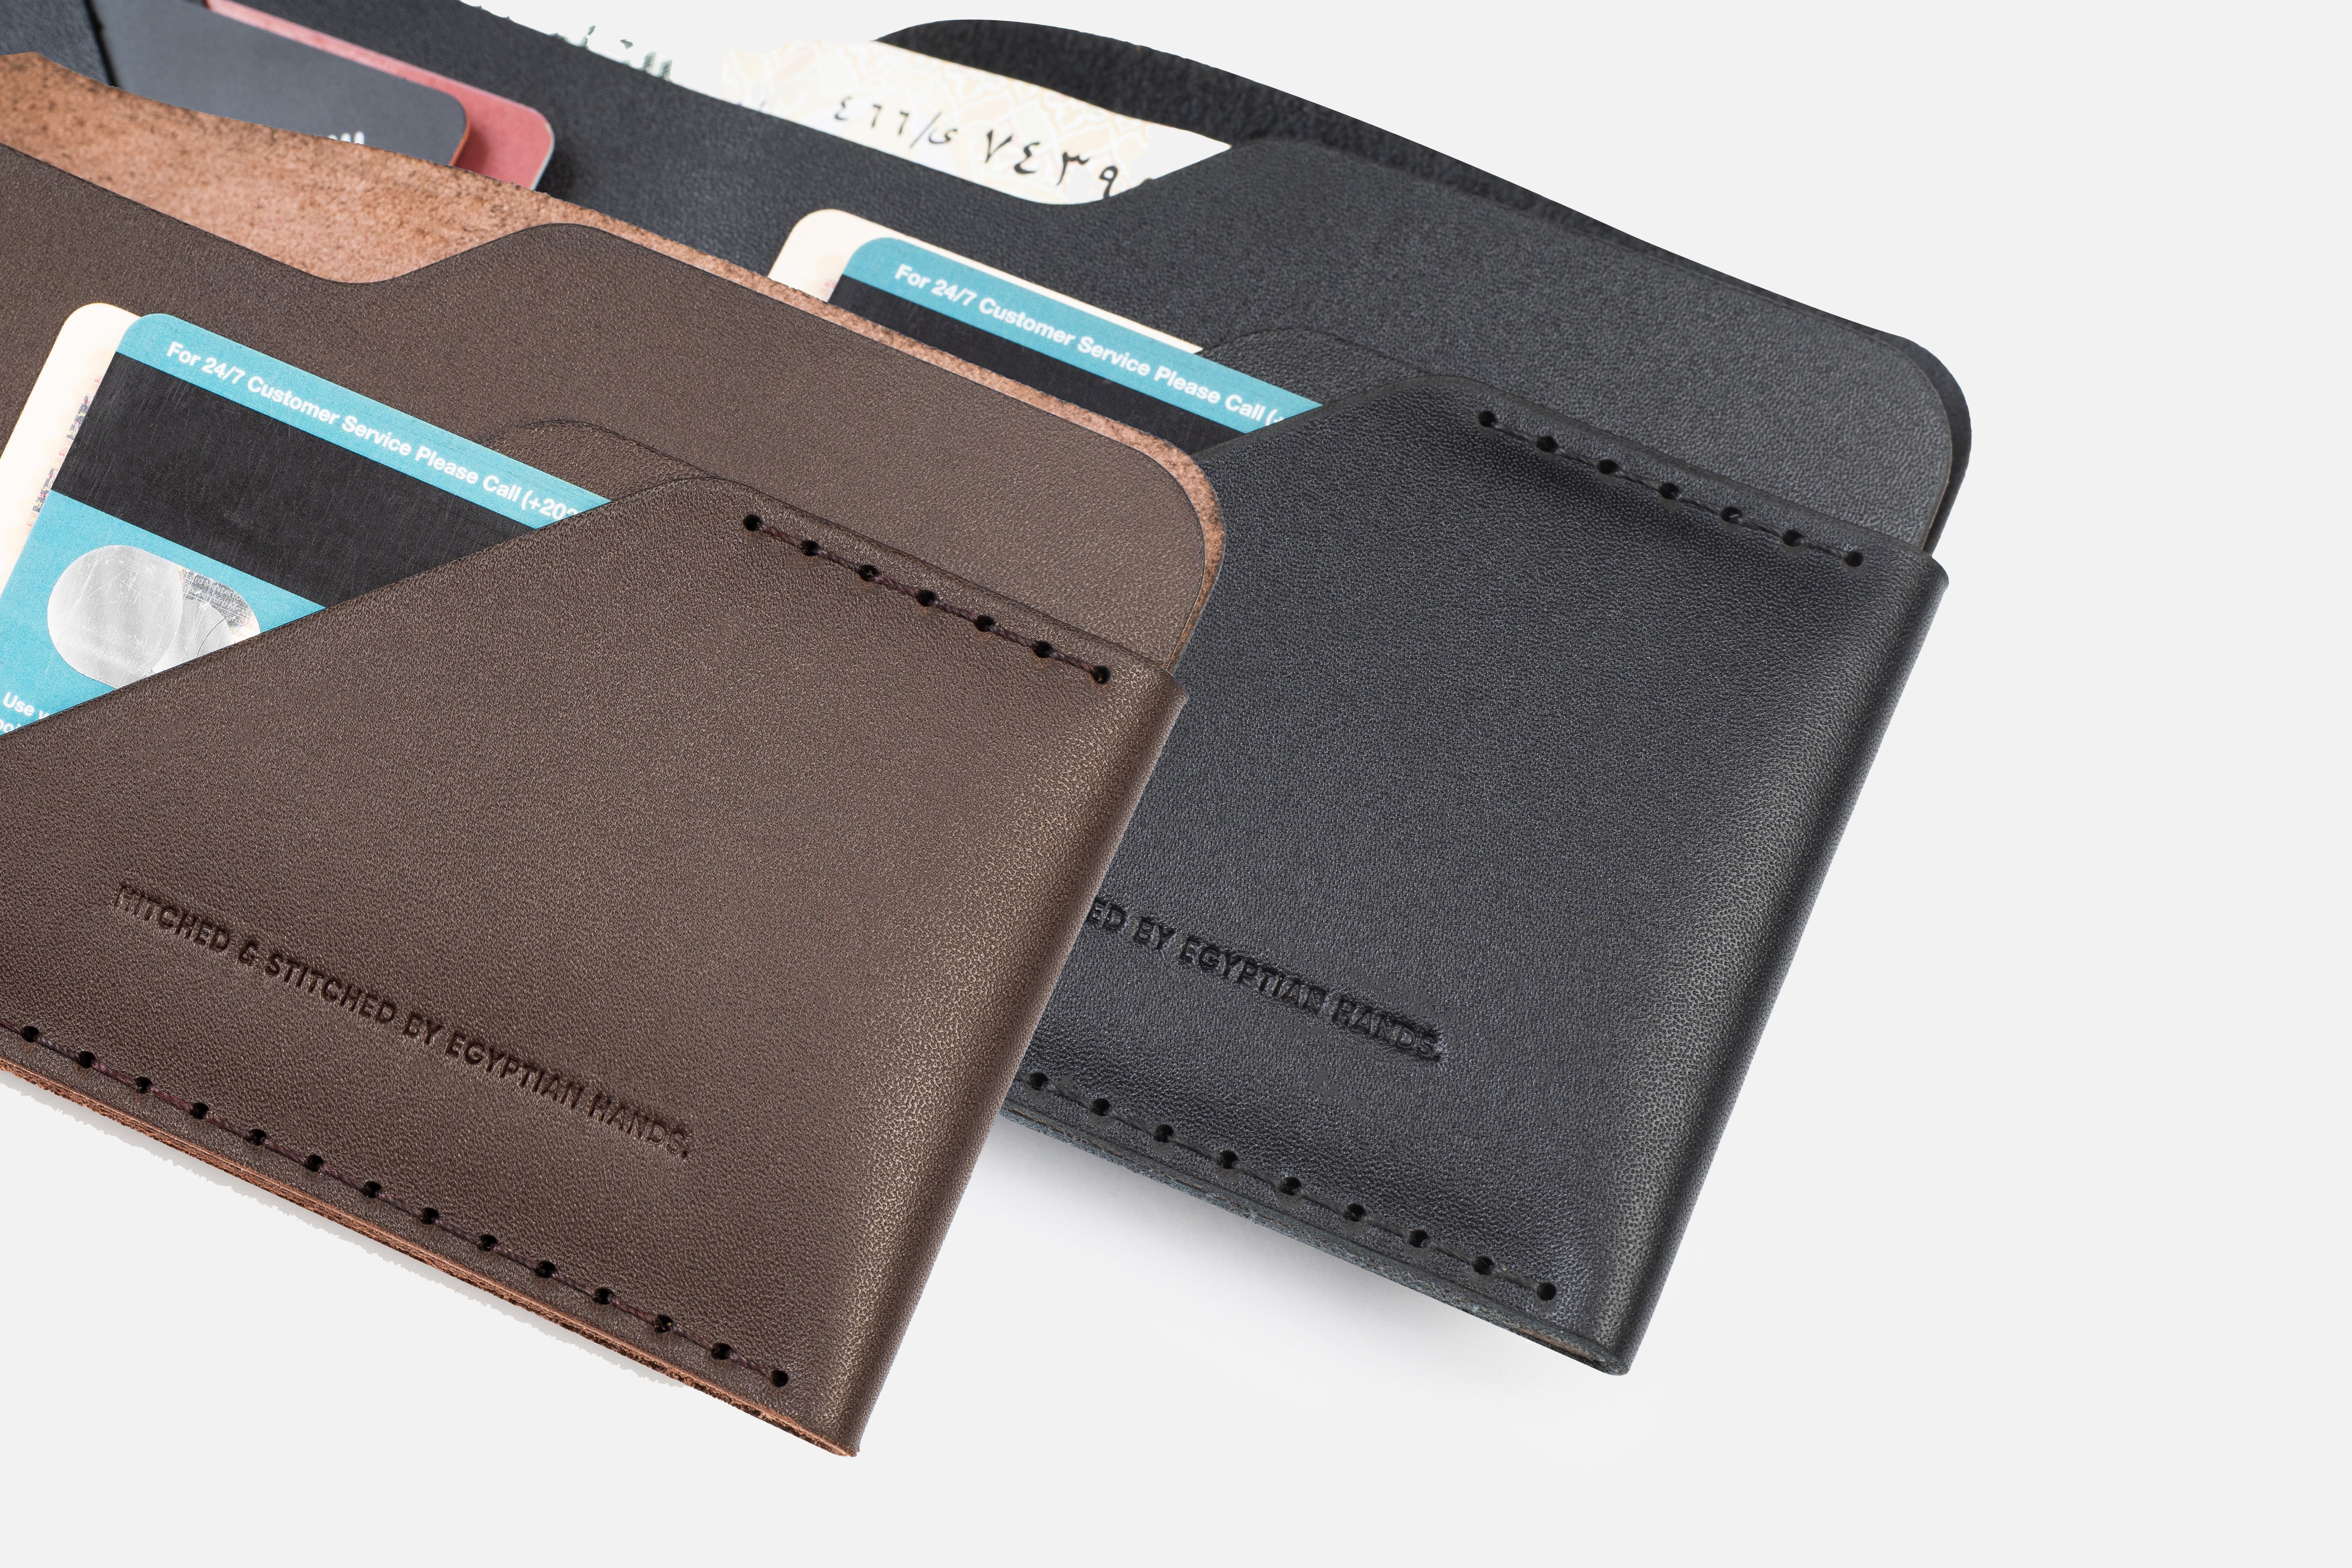 Brown and black leather bifold wallets with credit cards, embossed with Stitched by Egyptian Hands."